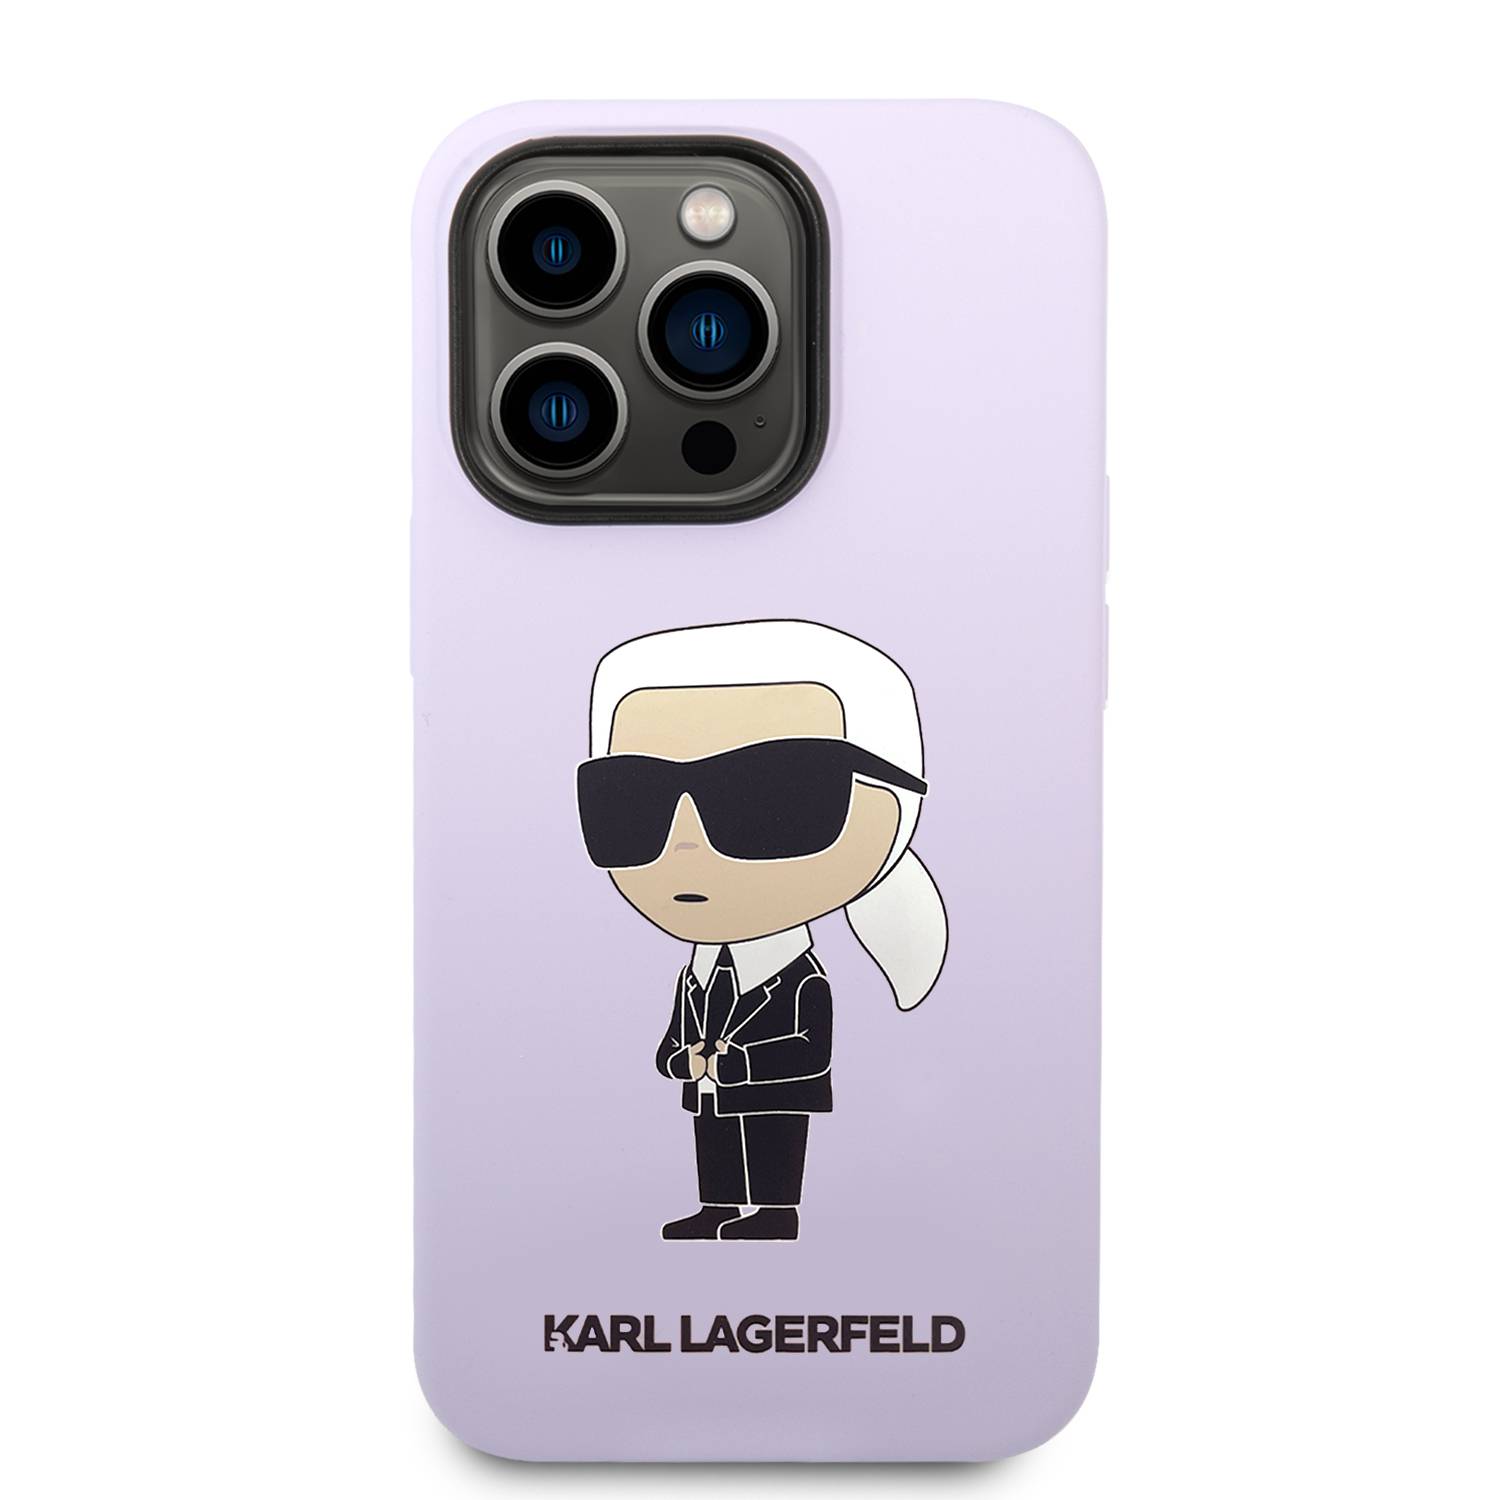 images/stories/virtuemart/product/Karl_Lagerfeld_Magsafe_Liquid_Silicone_Case_With_Ikonik_NFT_Logo_iPhone_14_Promax_2__1671638926_583